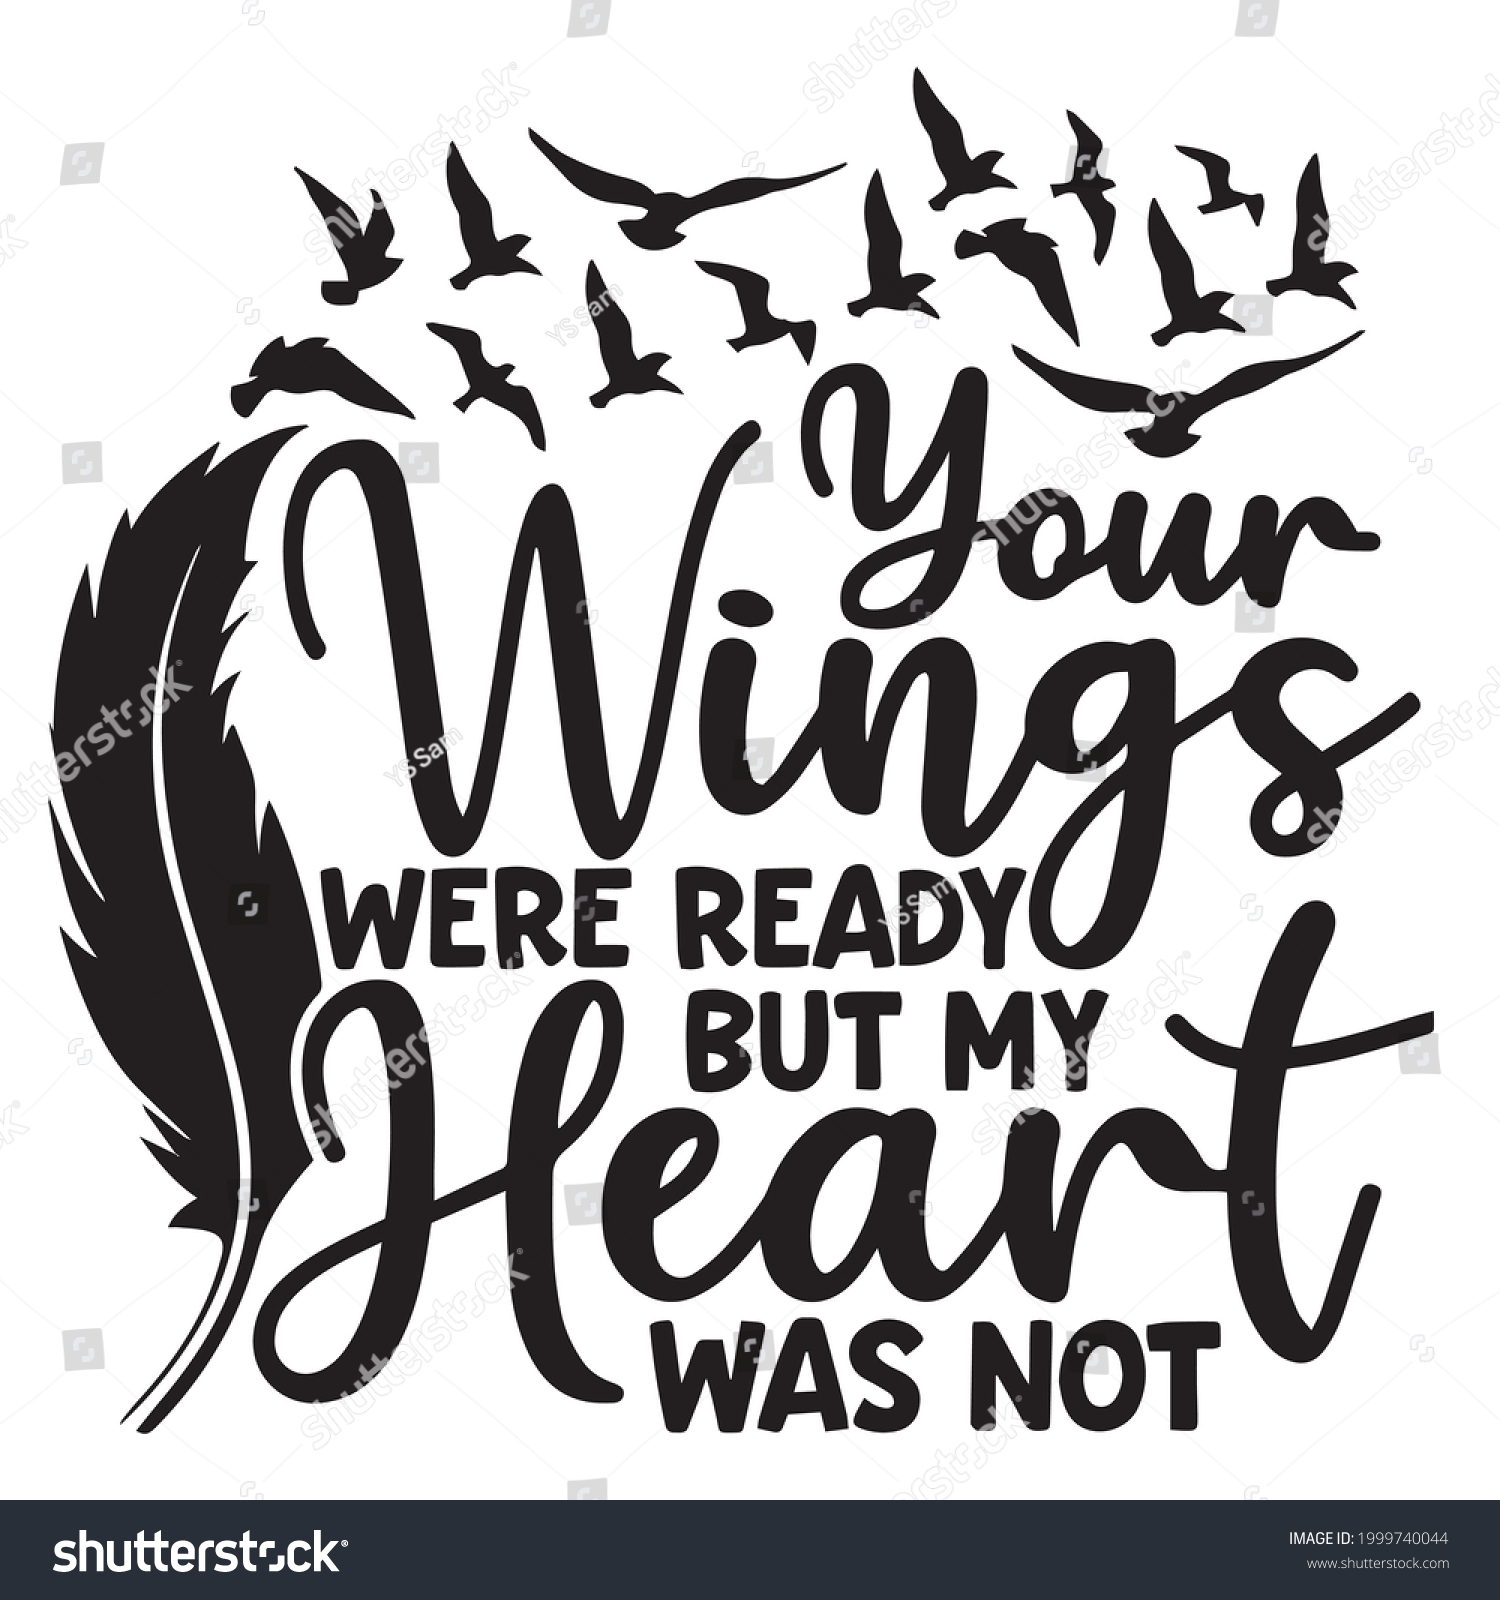 SVG of your wings were ready but my heart was not logo inspirational positive quotes, motivational, typography, lettering design svg